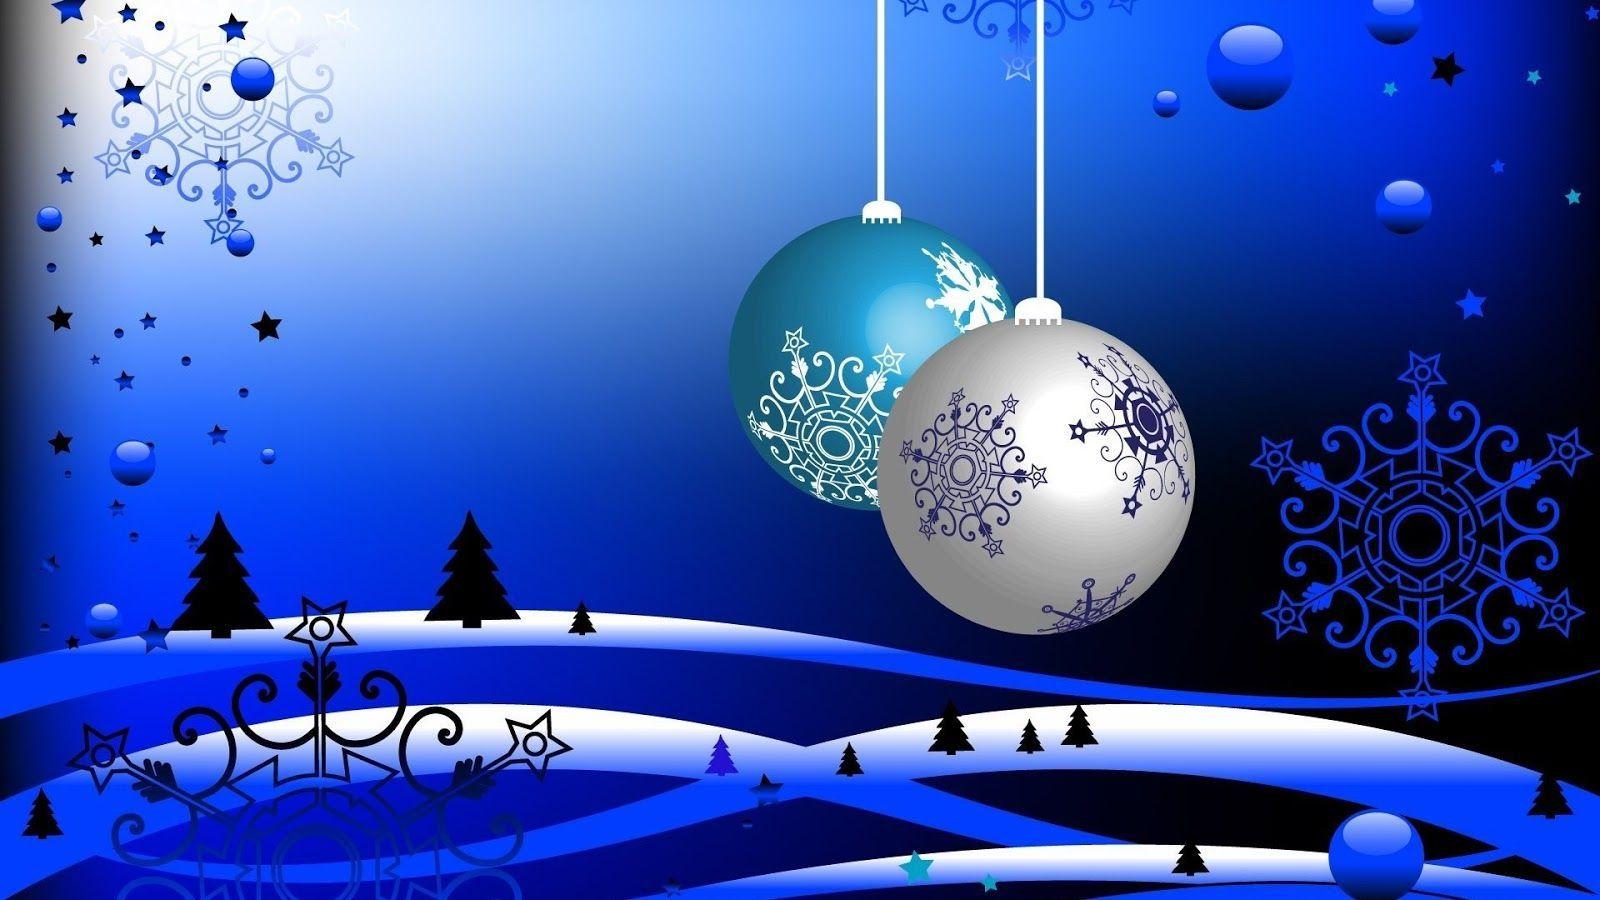 3000 Christmas Wallpapers and Photos in HD  Pixabay